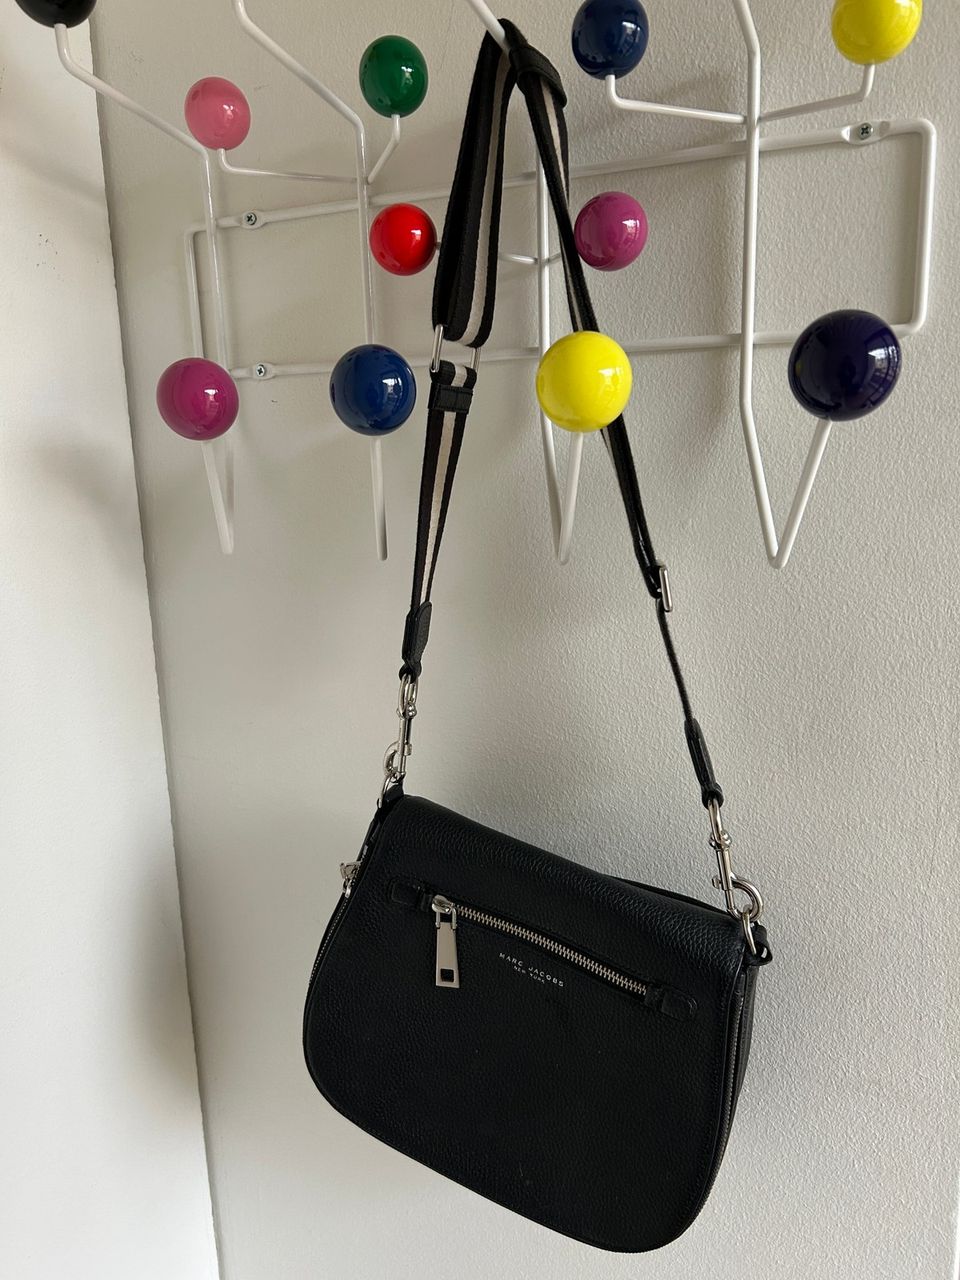 Marc by Marc Jacobs messenger